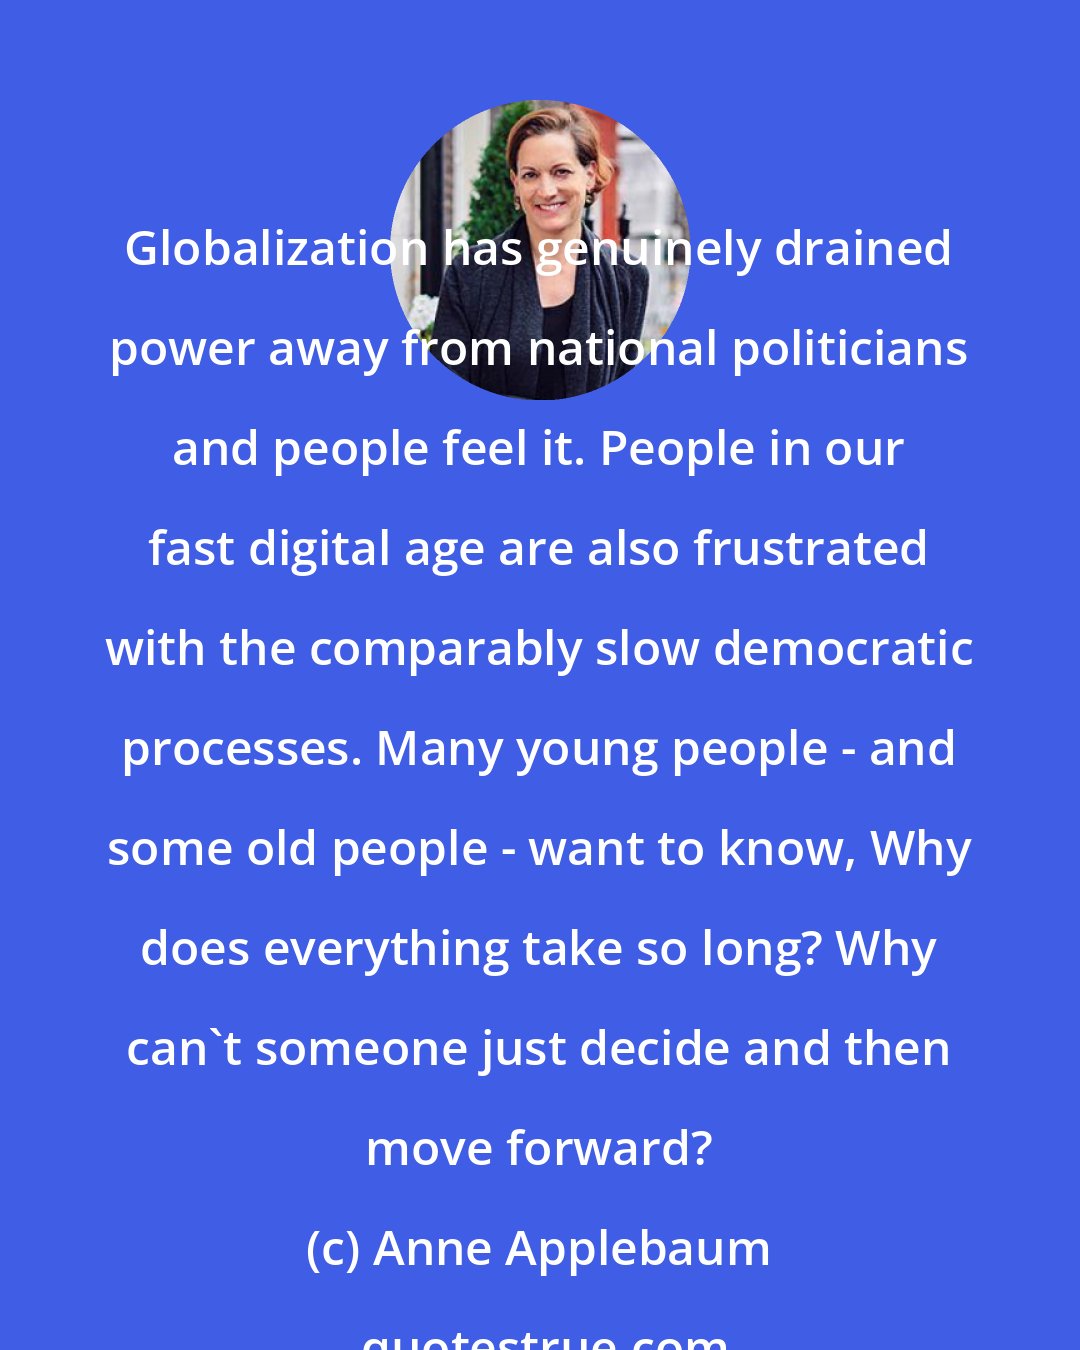 Anne Applebaum: Globalization has genuinely drained power away from national politicians and people feel it. People in our fast digital age are also frustrated with the comparably slow democratic processes. Many young people - and some old people - want to know, Why does everything take so long? Why can't someone just decide and then move forward?